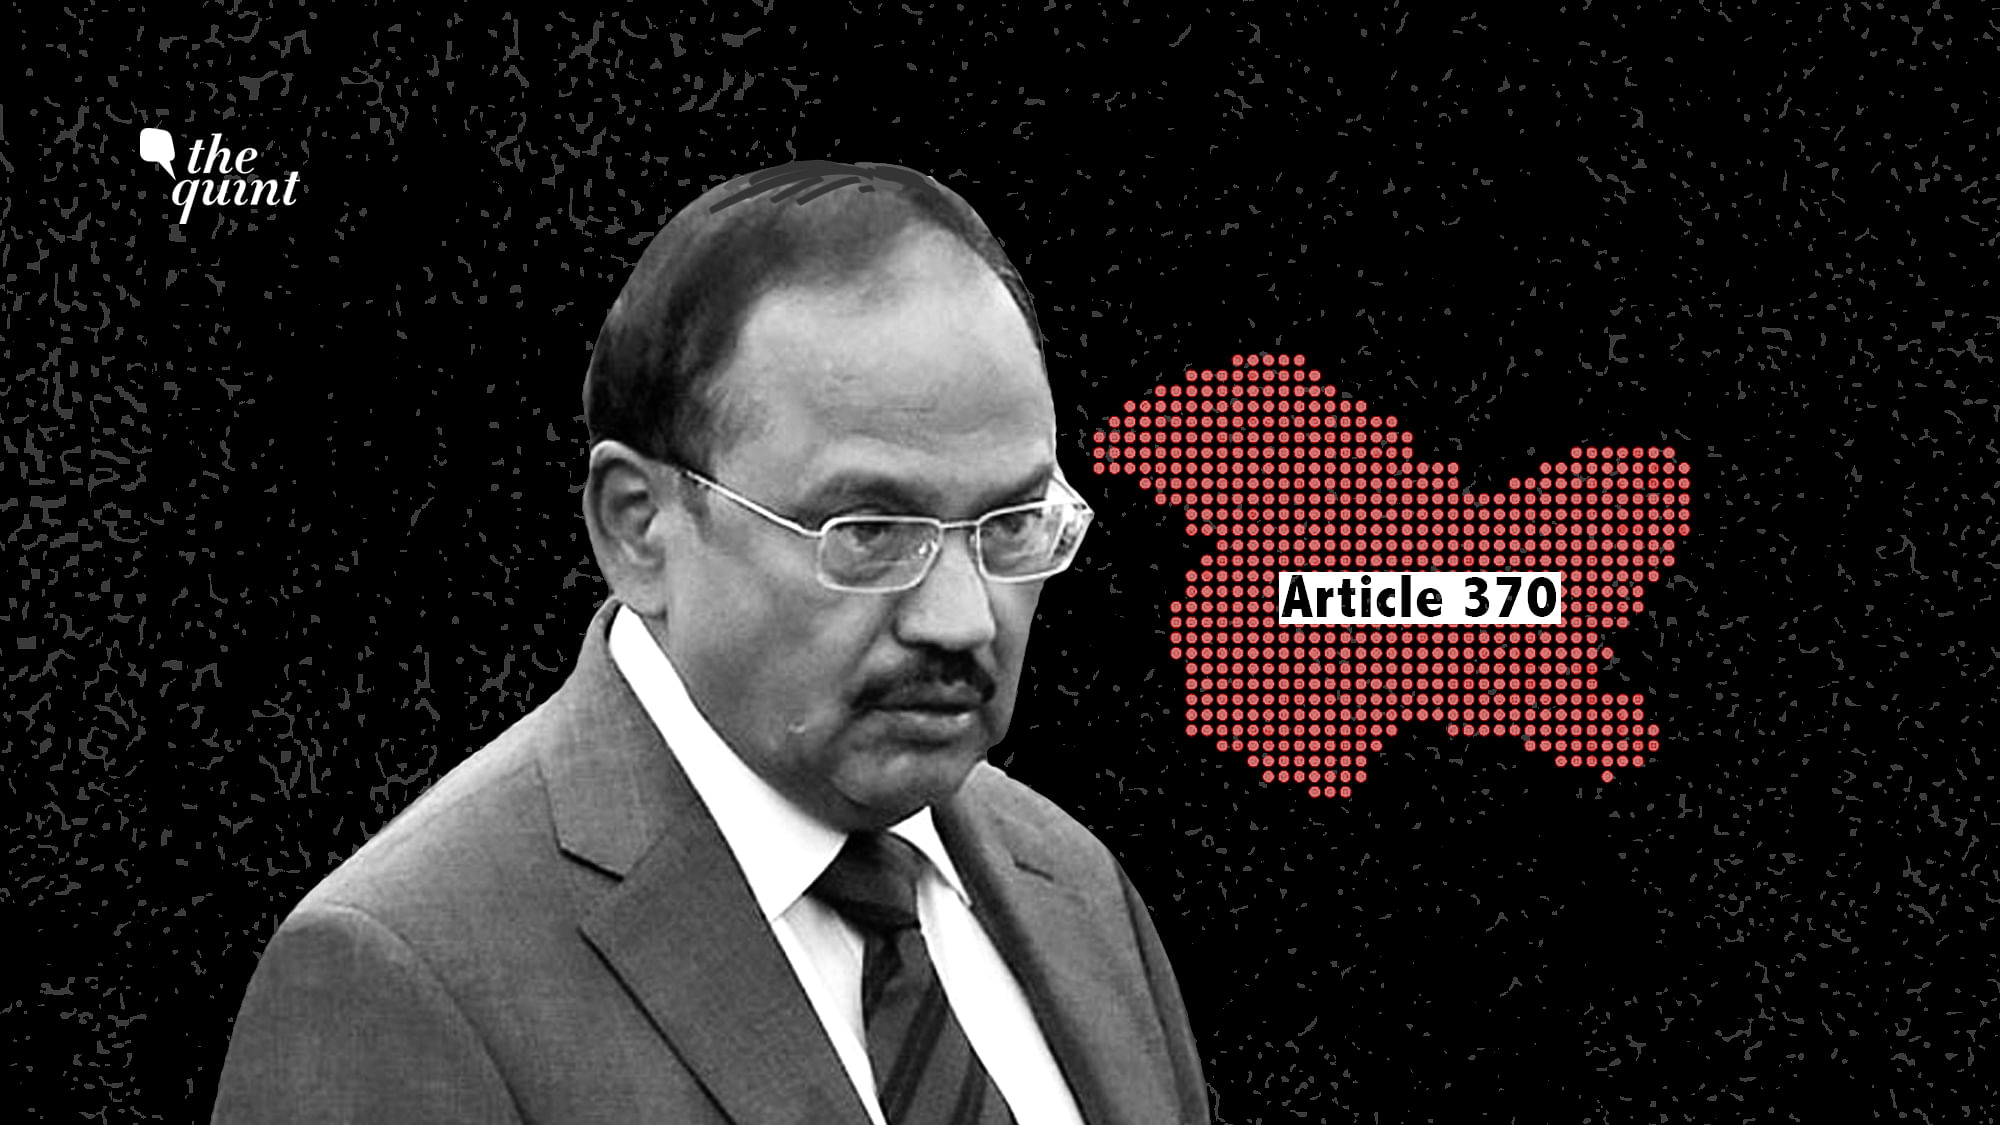 Image of National Security Advisor, Ajit Doval, used for representational purposes.